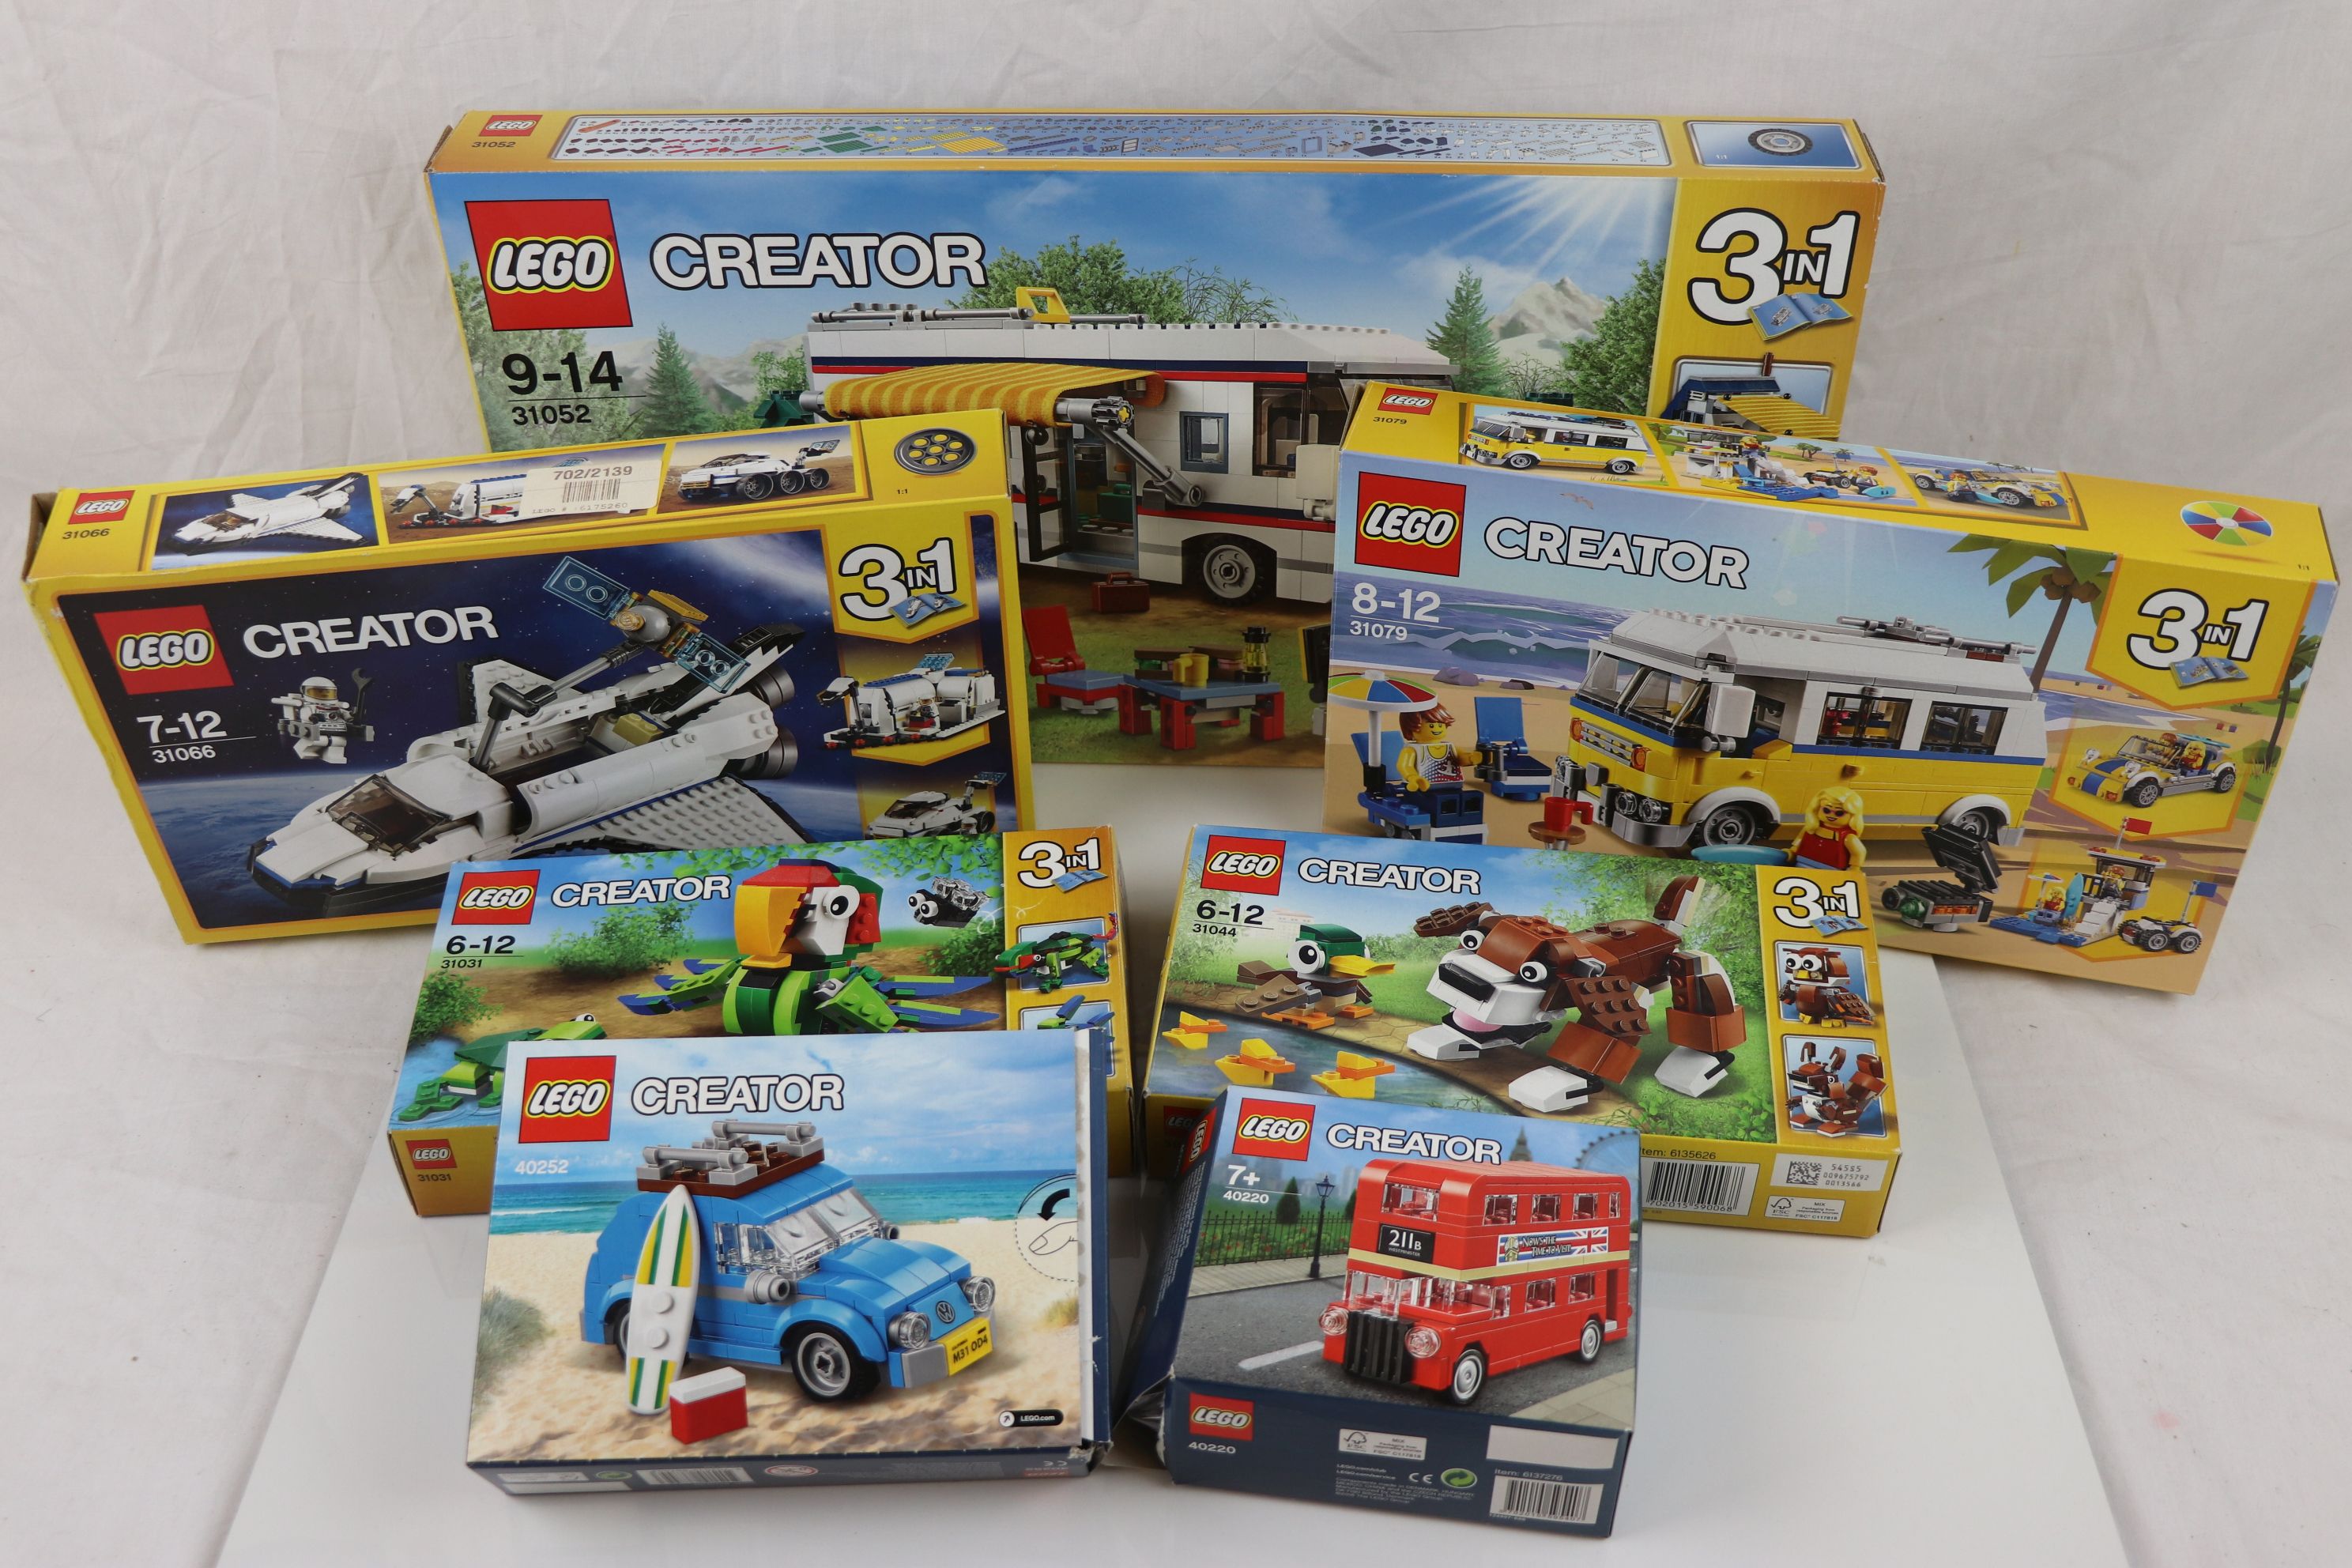 Seven boxed Lego Creator sets to include 31052, 31079, 31066, 40252, 40220, 31031 and 31044